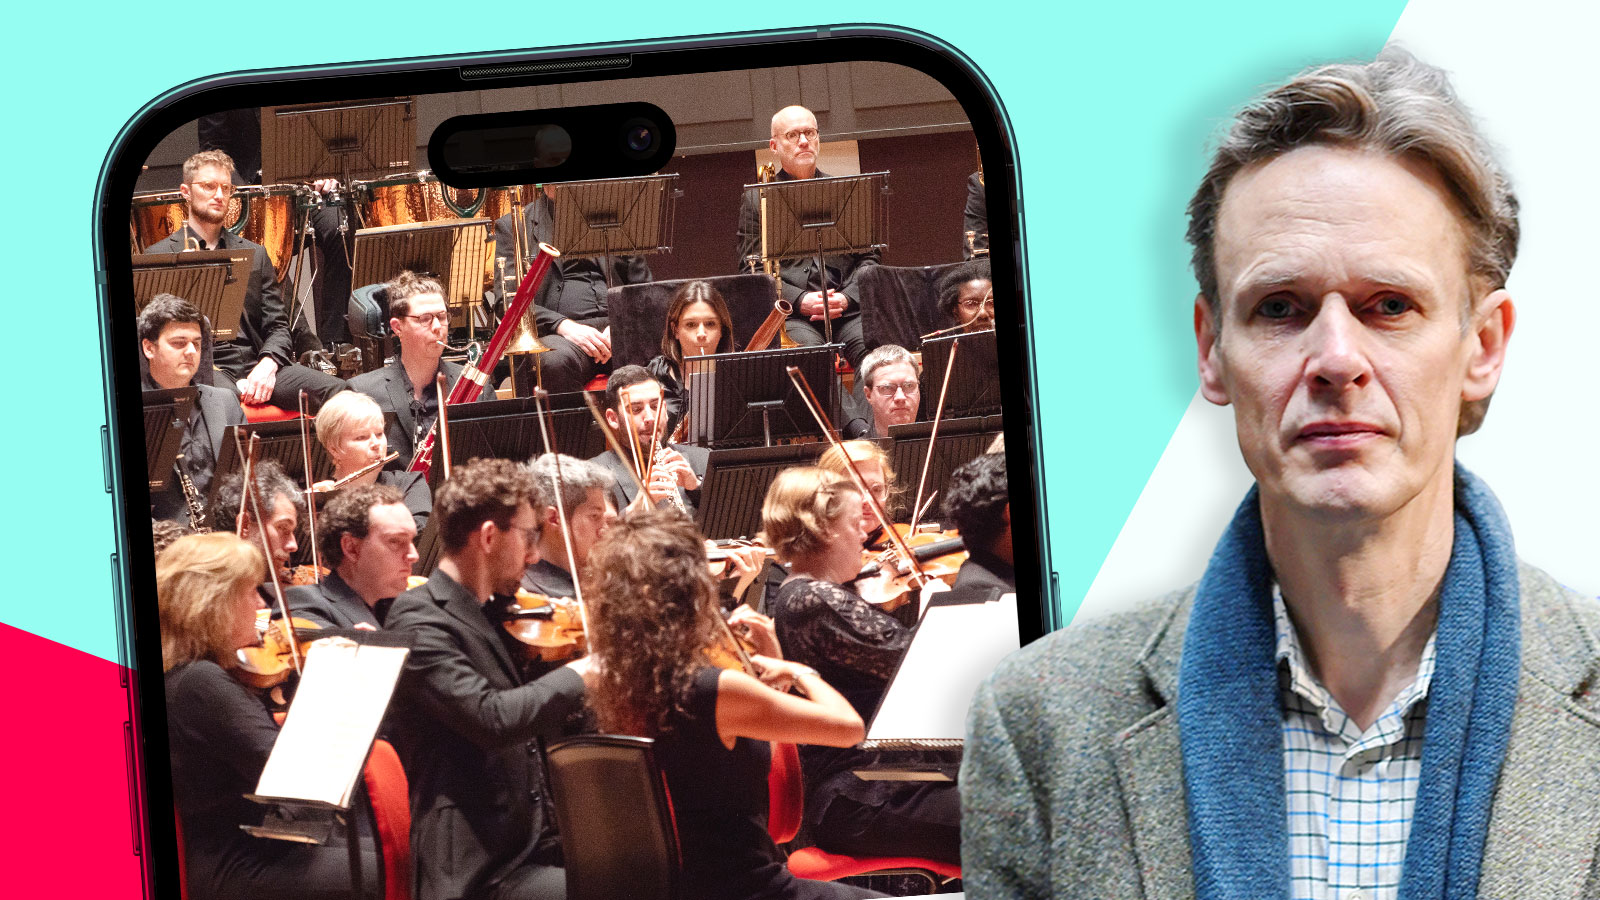 The tenor Ian Bostridge said he had been unaware of the orchestra’s policy when he complained